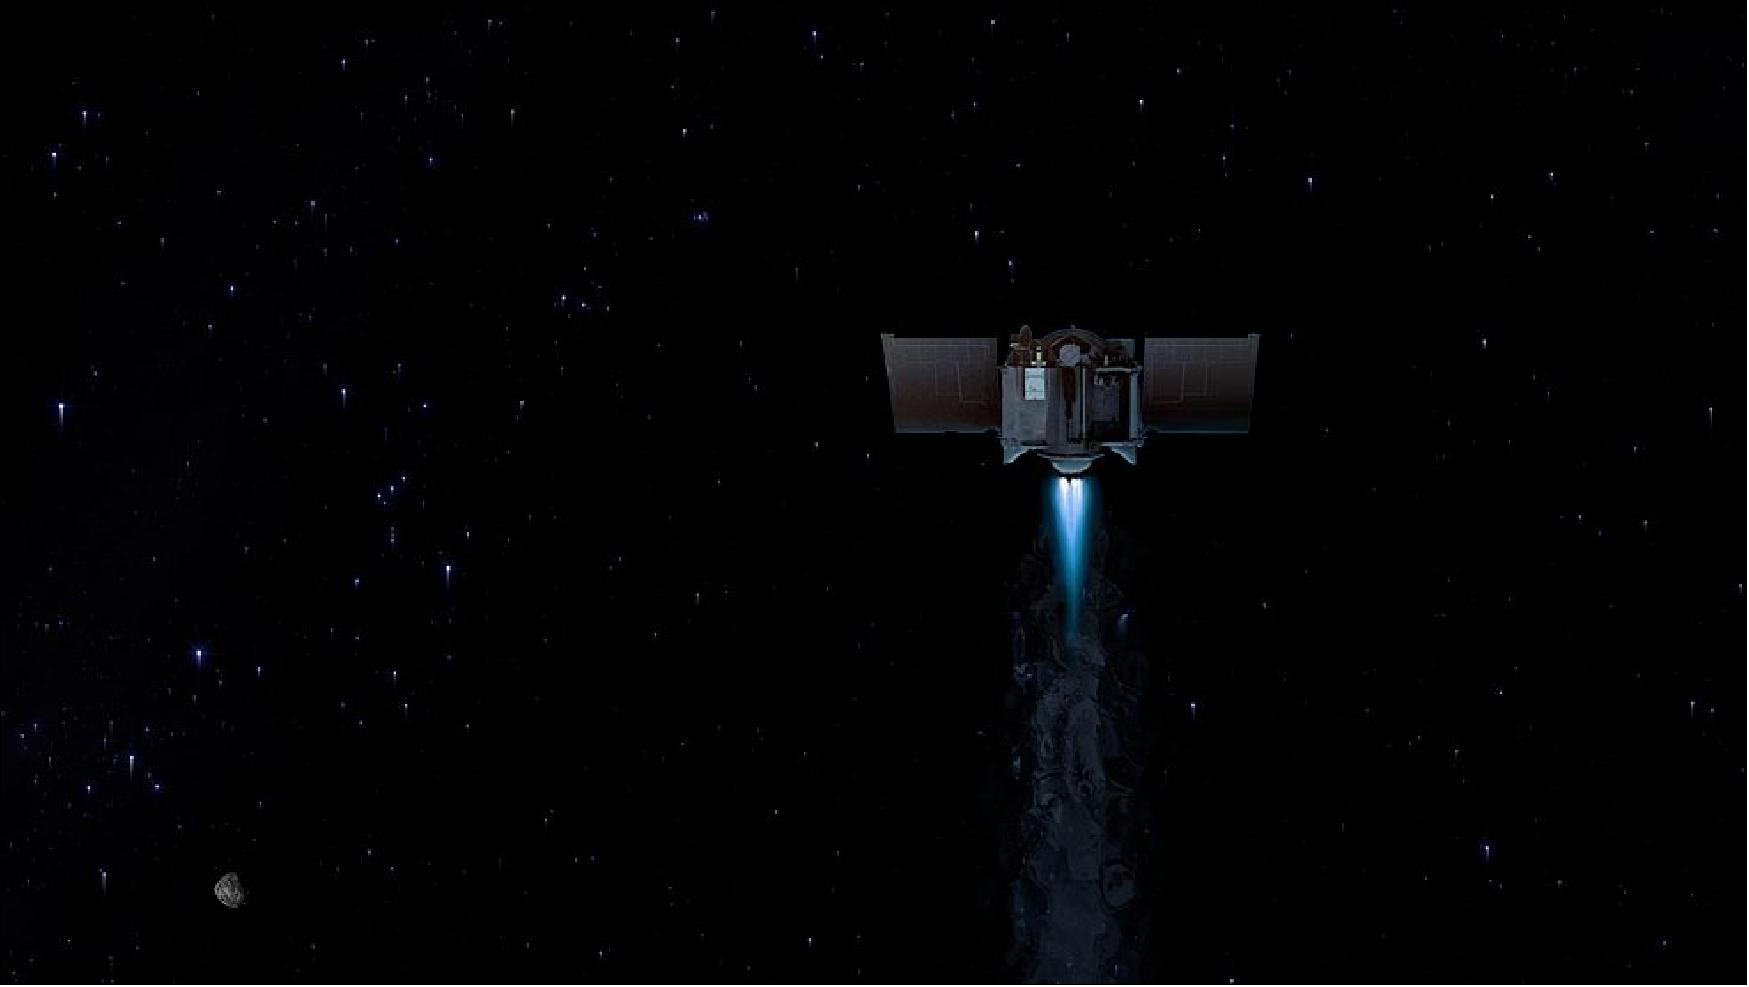 Figure 19: This illustration shows the OSIRIS-REx spacecraft departing asteroid Bennu to begin its two-year journey back to Earth (image credits: NASA/Goddard/University of Arizona)